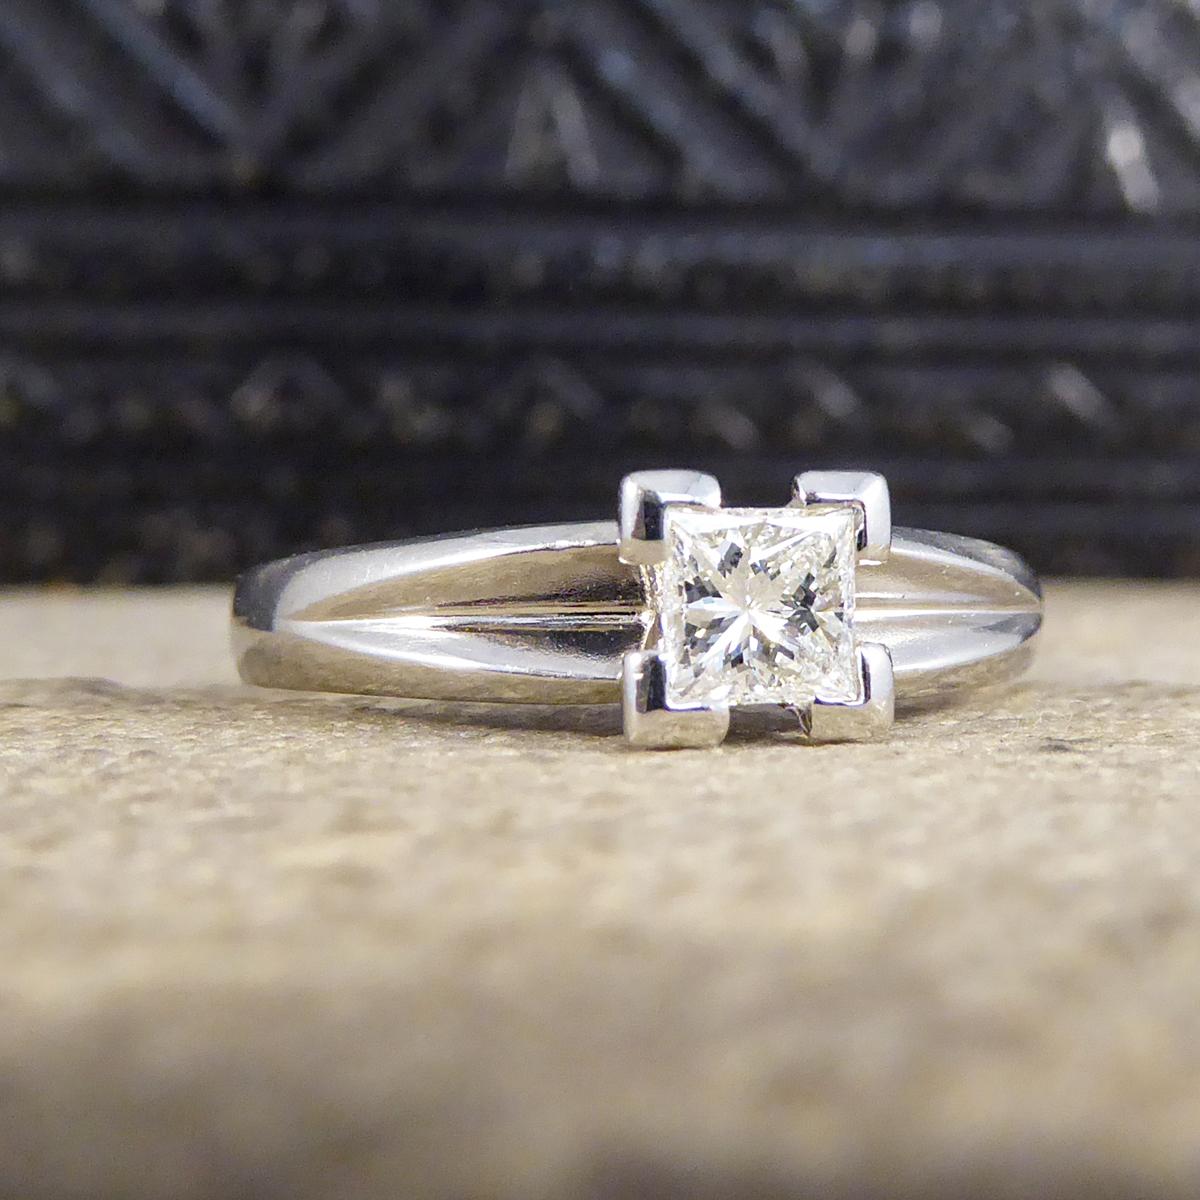 This absolutely stunning engagement ring holds a 0.45ct Princess Cut Diamond and is such a bright and clear stone. The mount has been fully crafted from Platinum, this contemporary solitaire ring shows its simplicity in the shank with corner claw